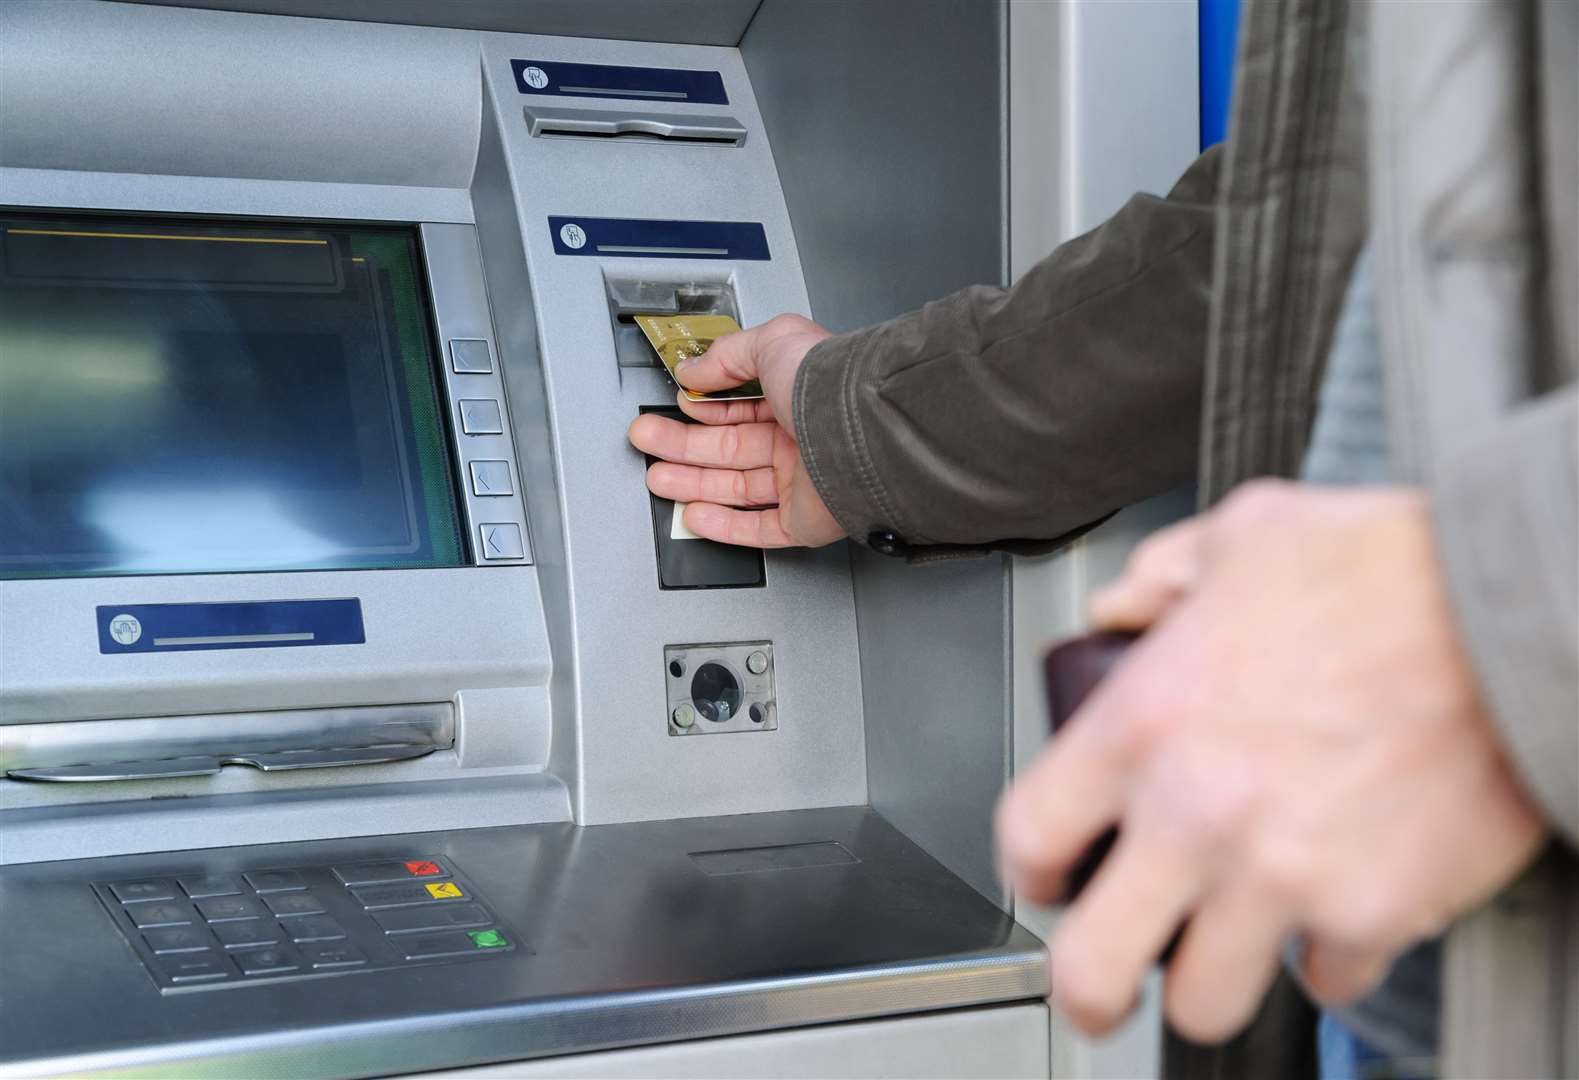 Concern has been raised about the withdrawal of ATM services.